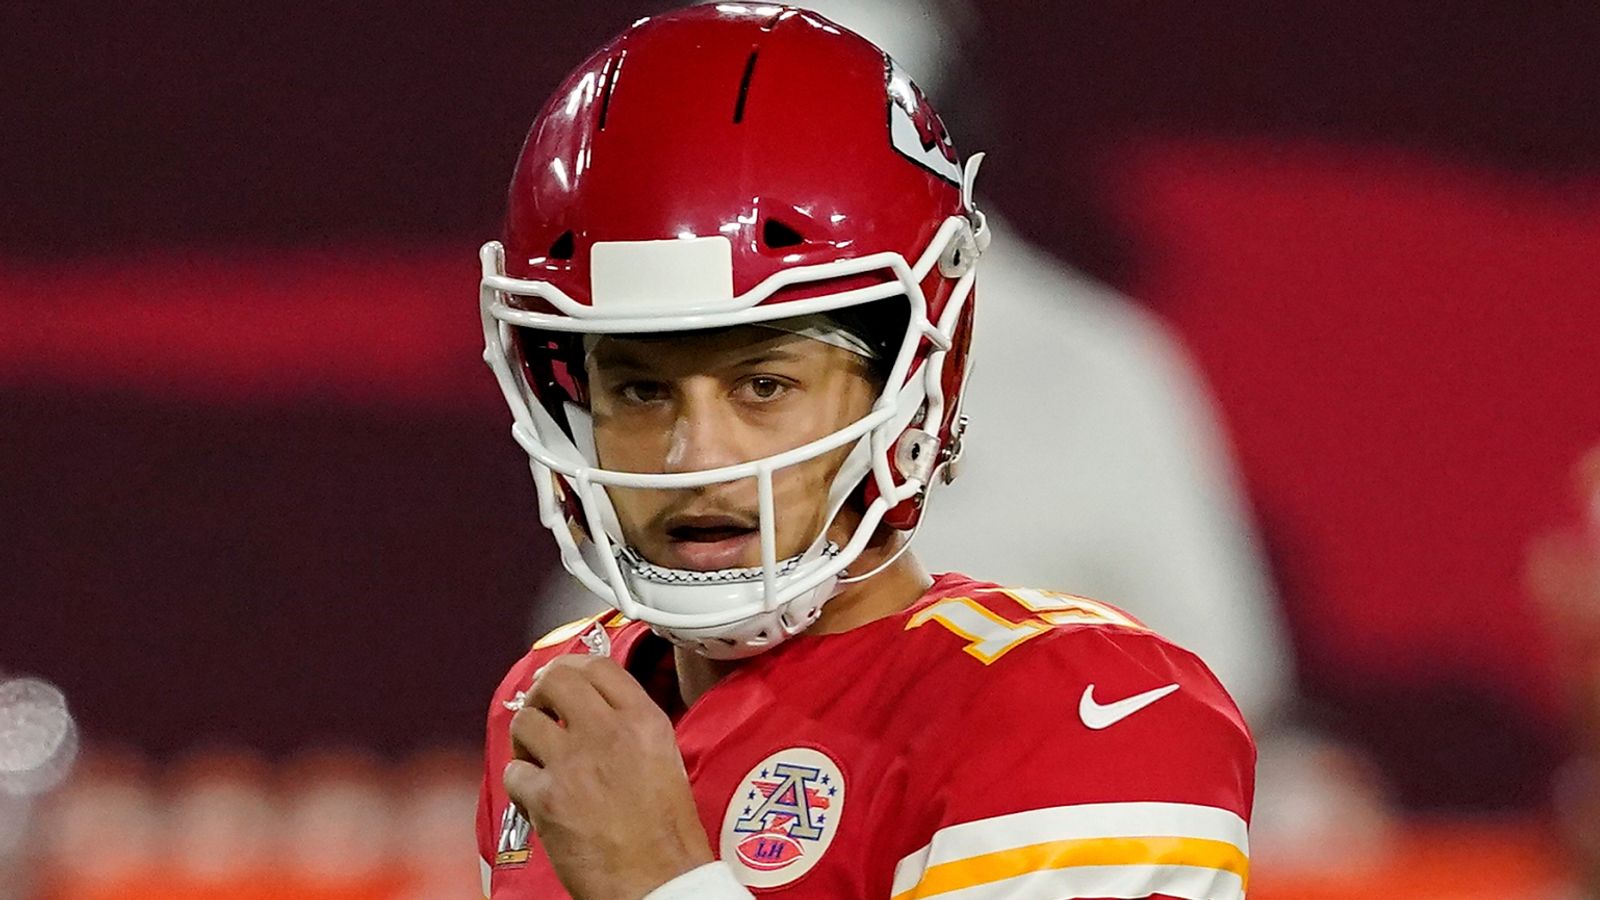 Patrick Mahomes: Kansas City Chiefs quarterback says he is 'ahead of schedule' in recovery from